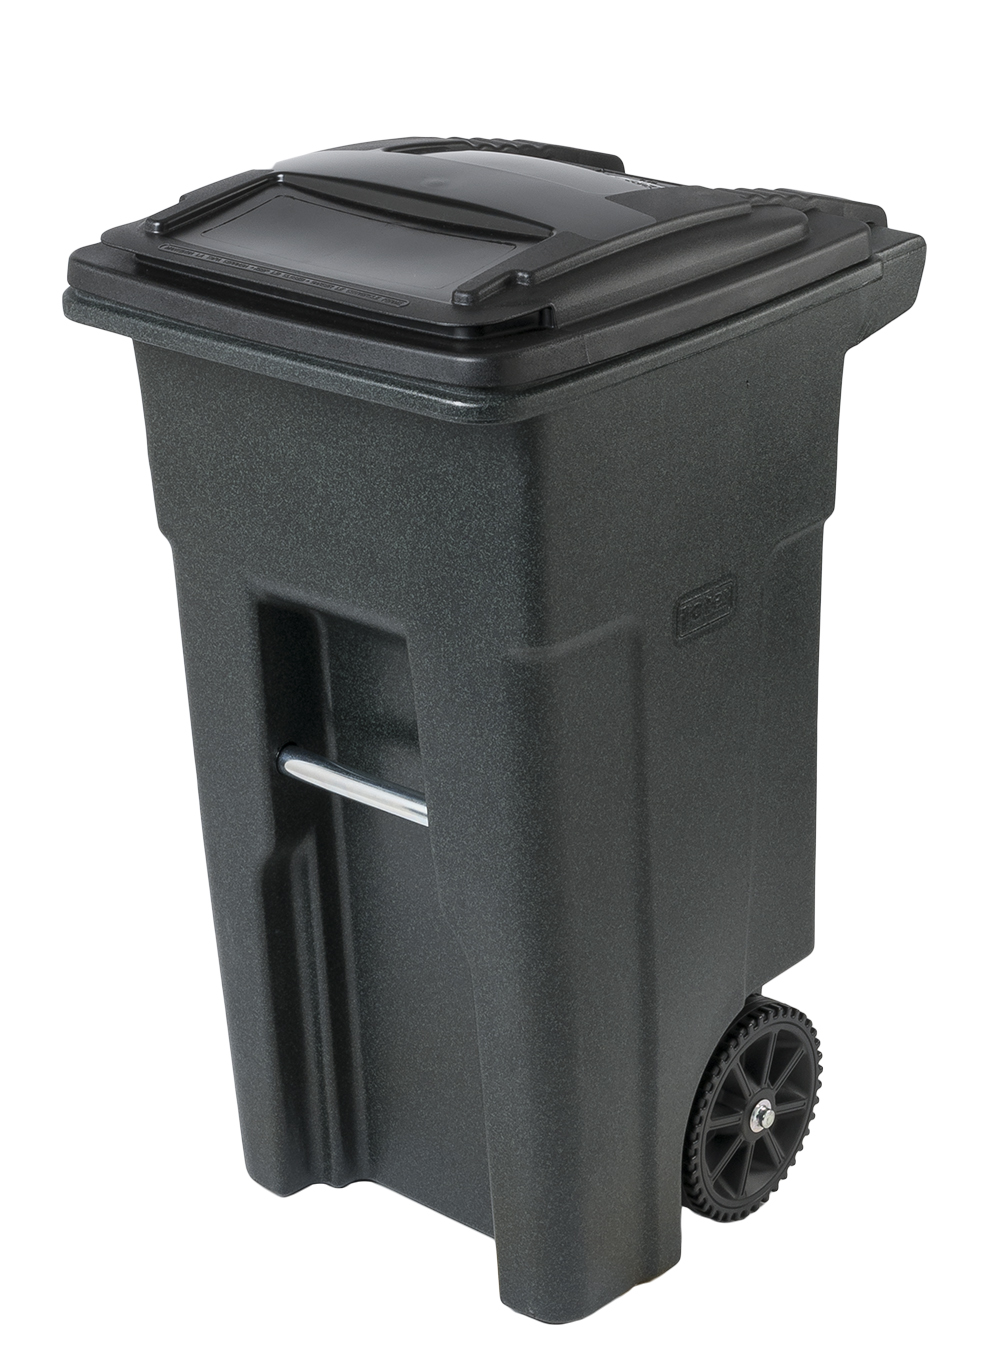 The Best Trash Cans You Can Buy